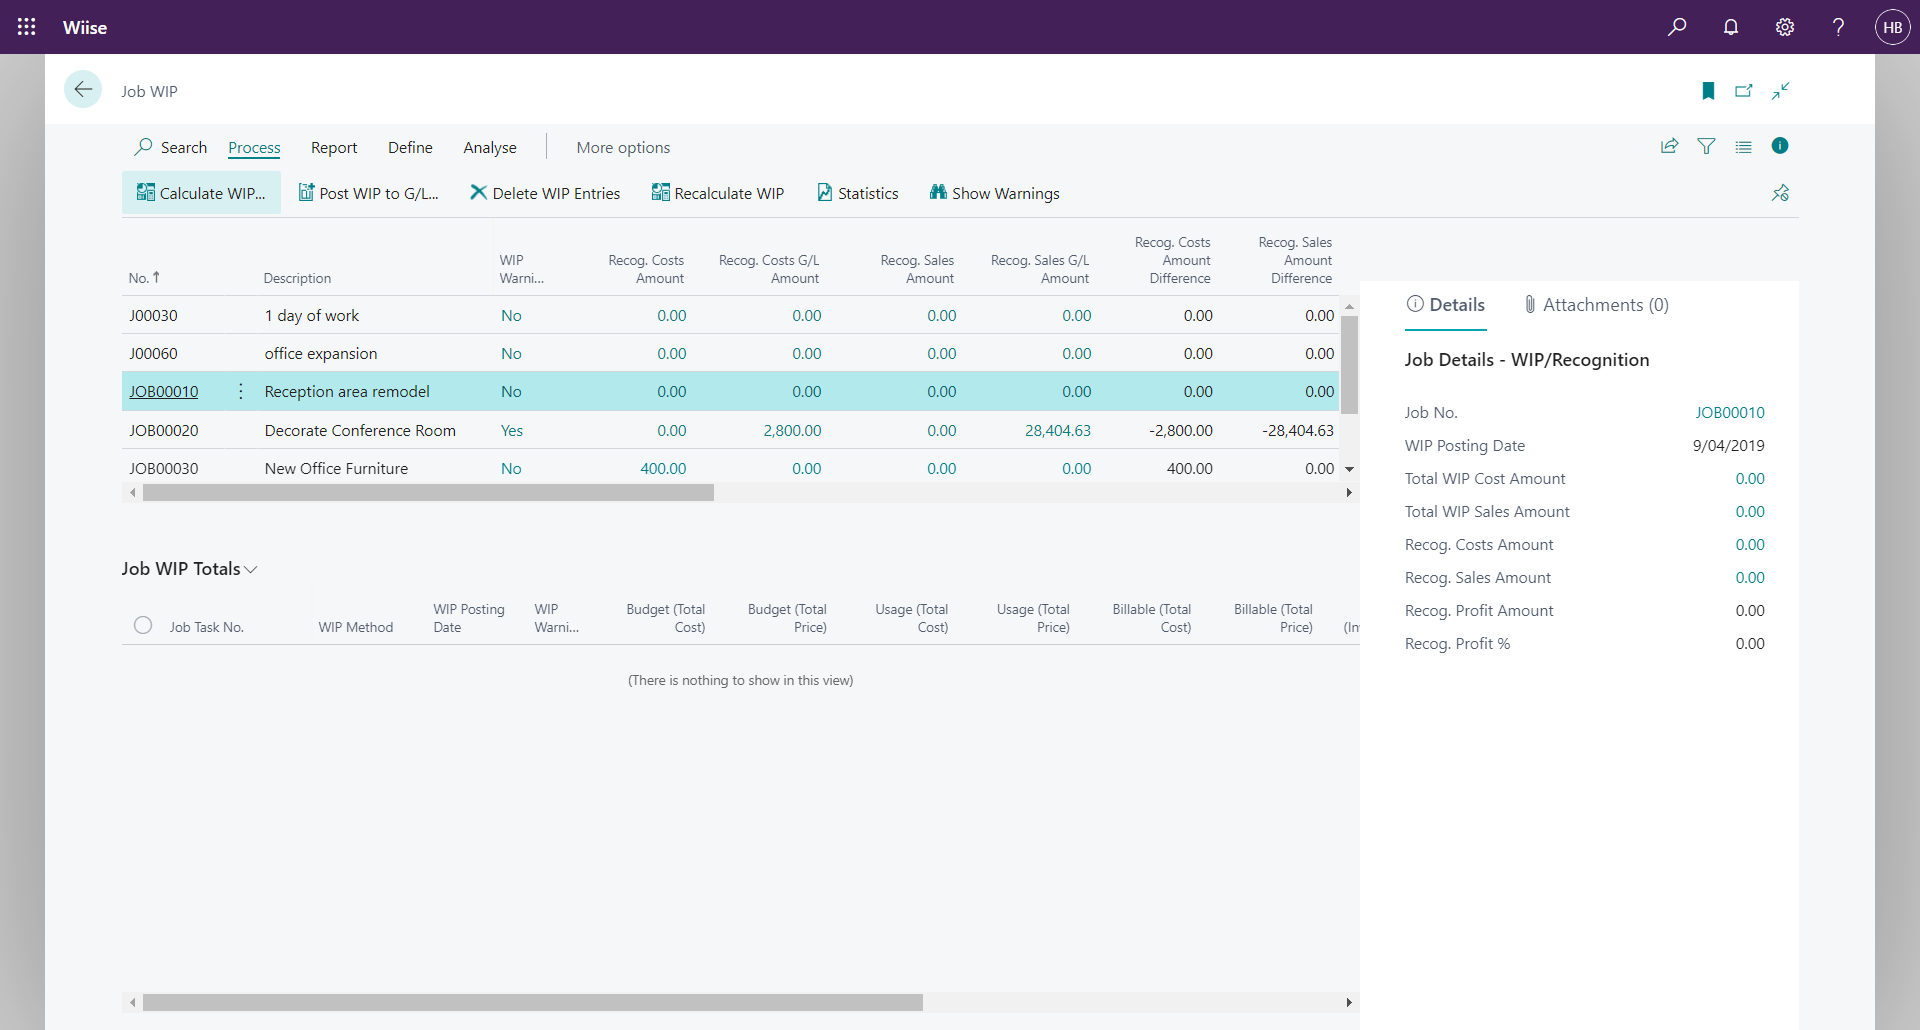 Monitor and track project costs across all jobs and drill down on costs to ensure everything is running on budget. View Real-time visibility on actuals, multiple budgets, forecasts, and cost variances. Control an ongoing project and monitor cost.